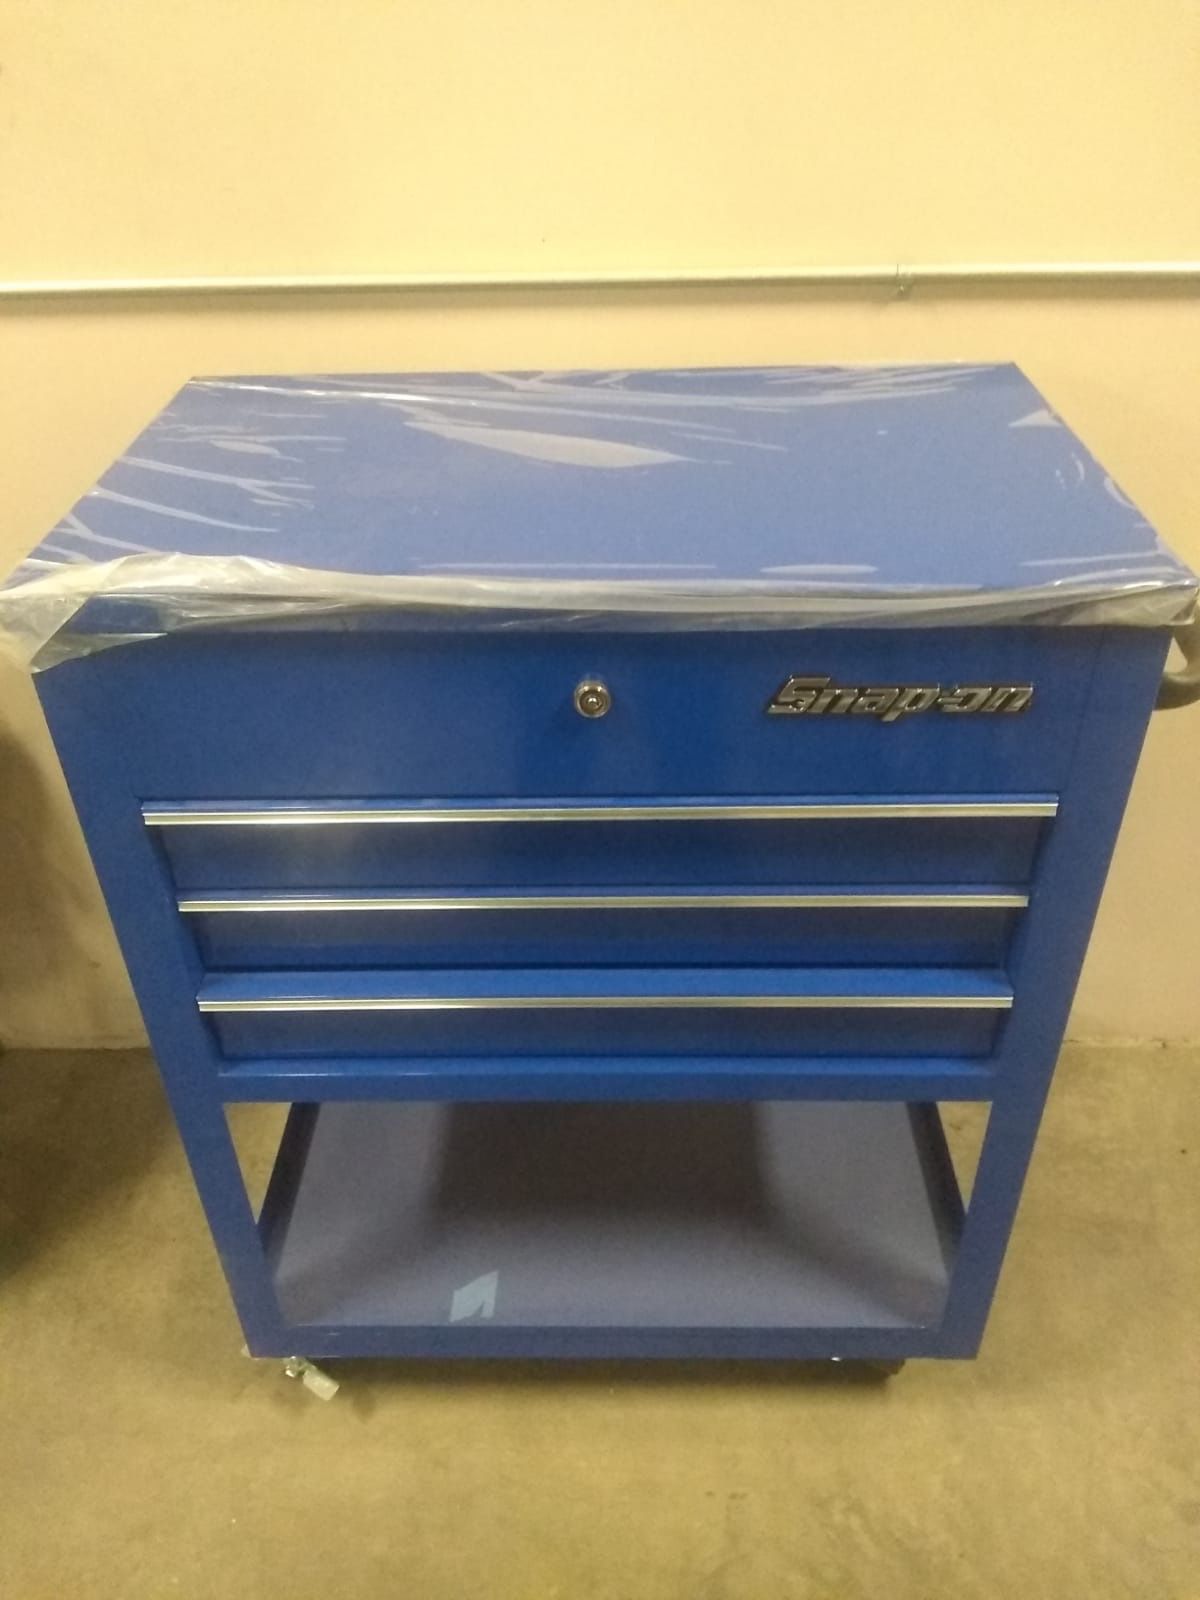 Tool box snap on. Good condition $700 obo